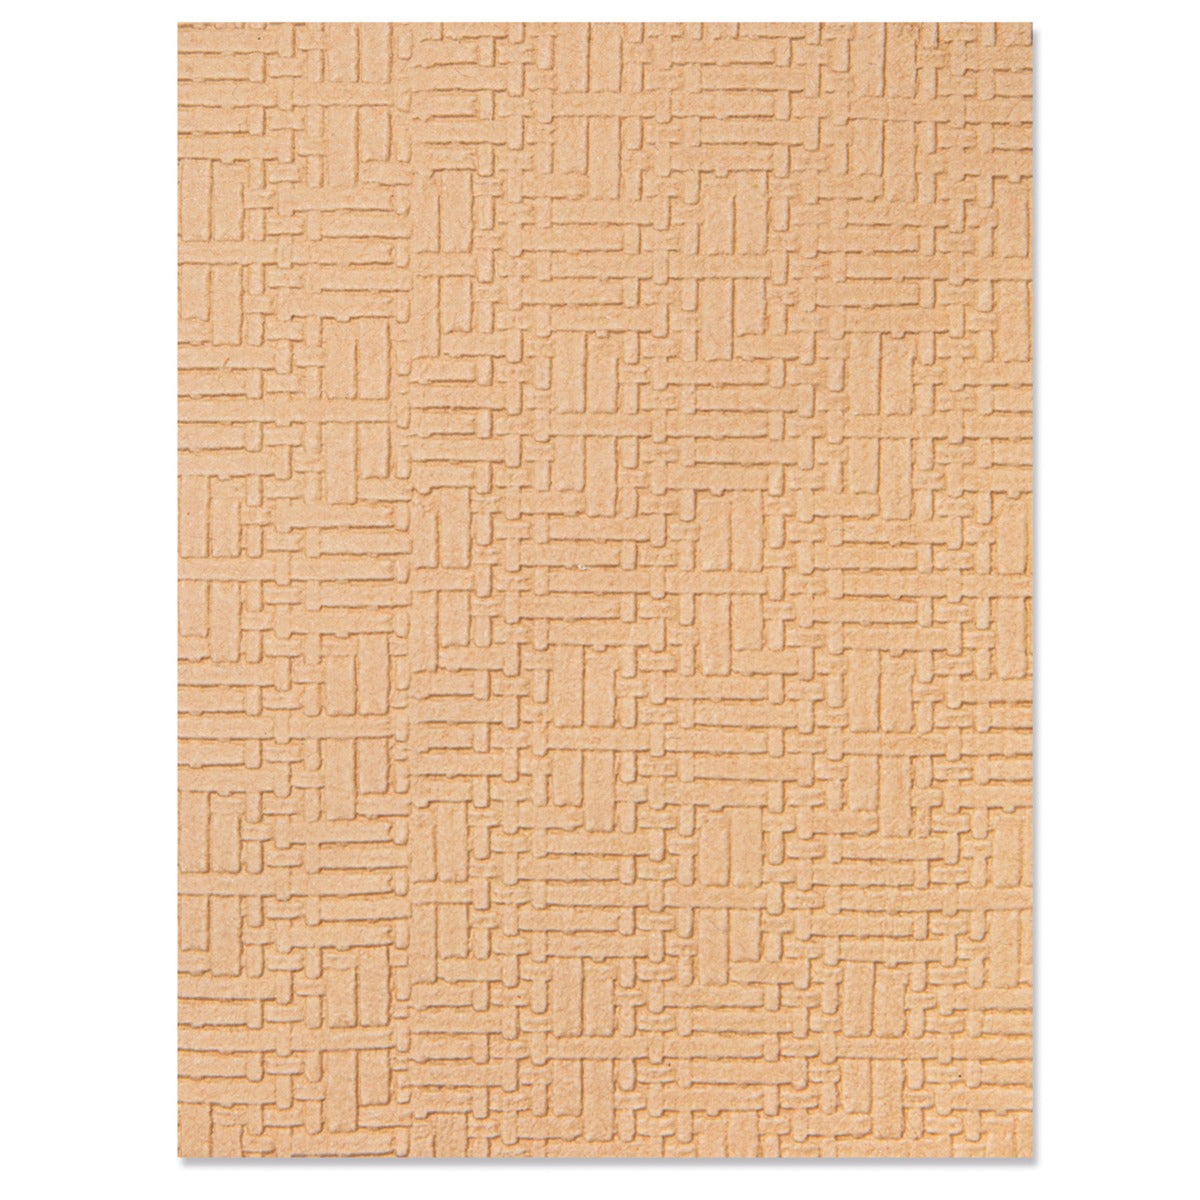 sizzix-3-d-textured-impressions-embossing-folder-woven-leather-by-eileen-hull